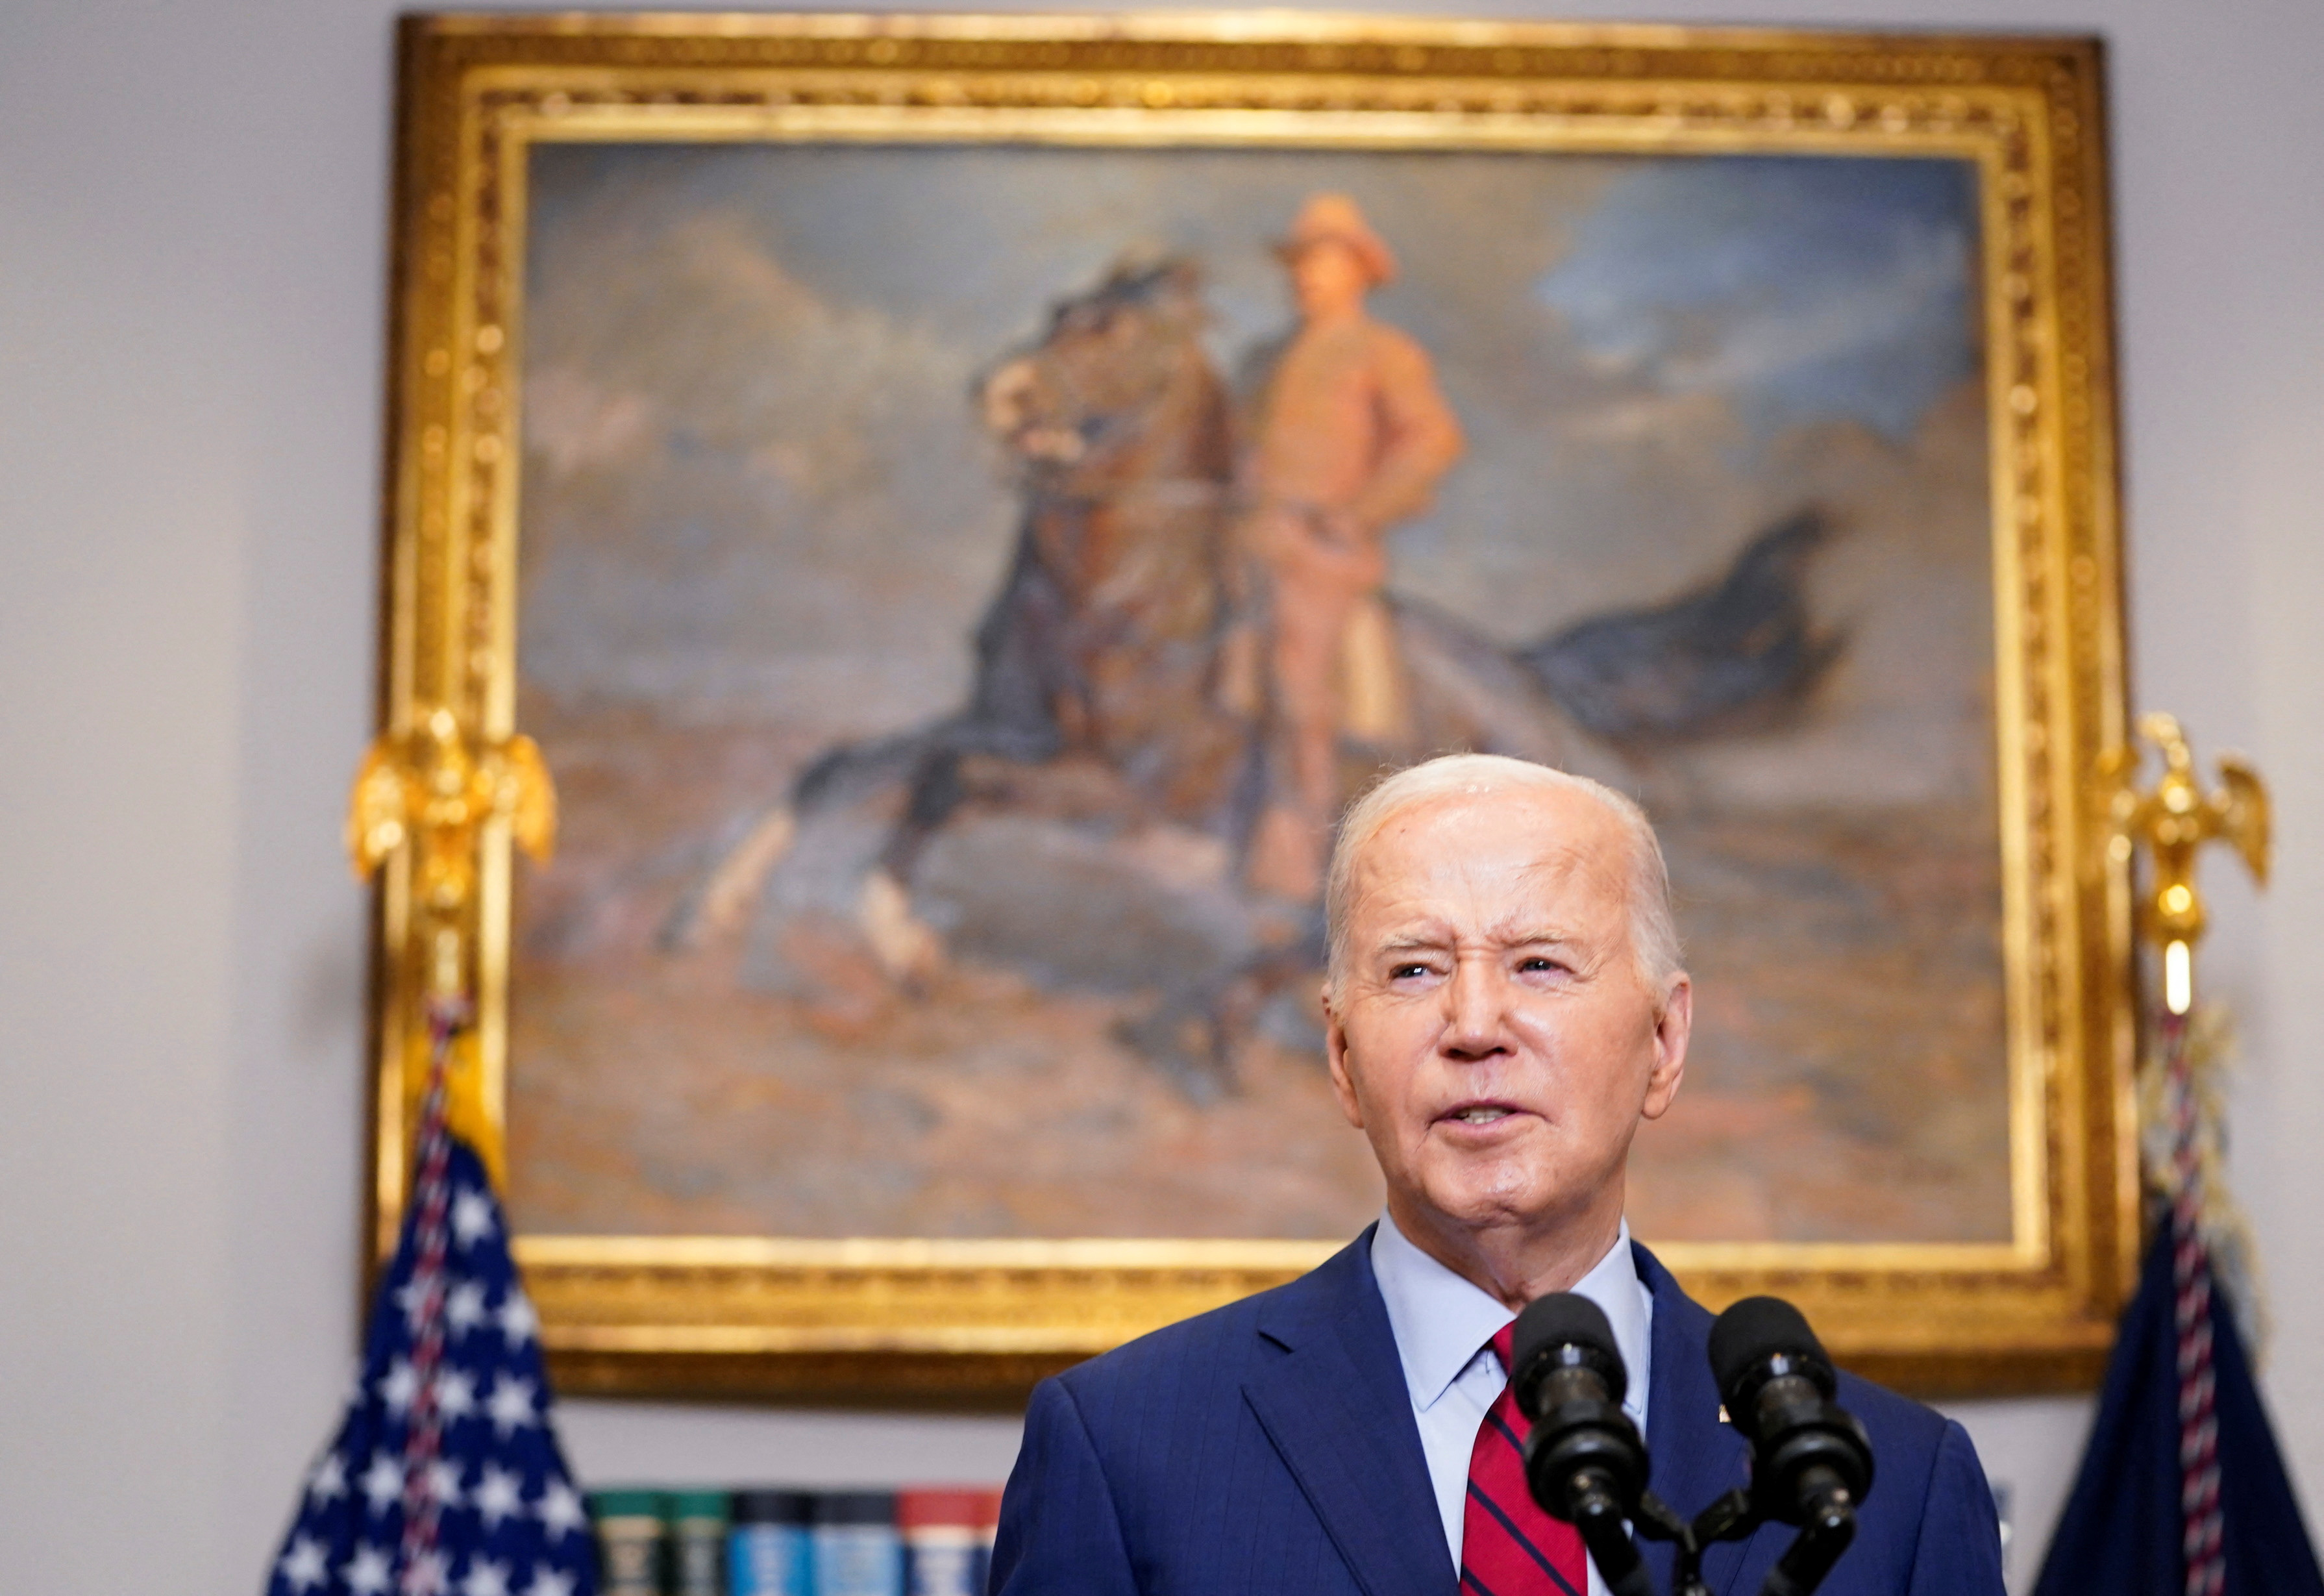 U.S. President Joe Biden discusses ongoing student protests at U.S universities during brief remarks at the White House in Washington